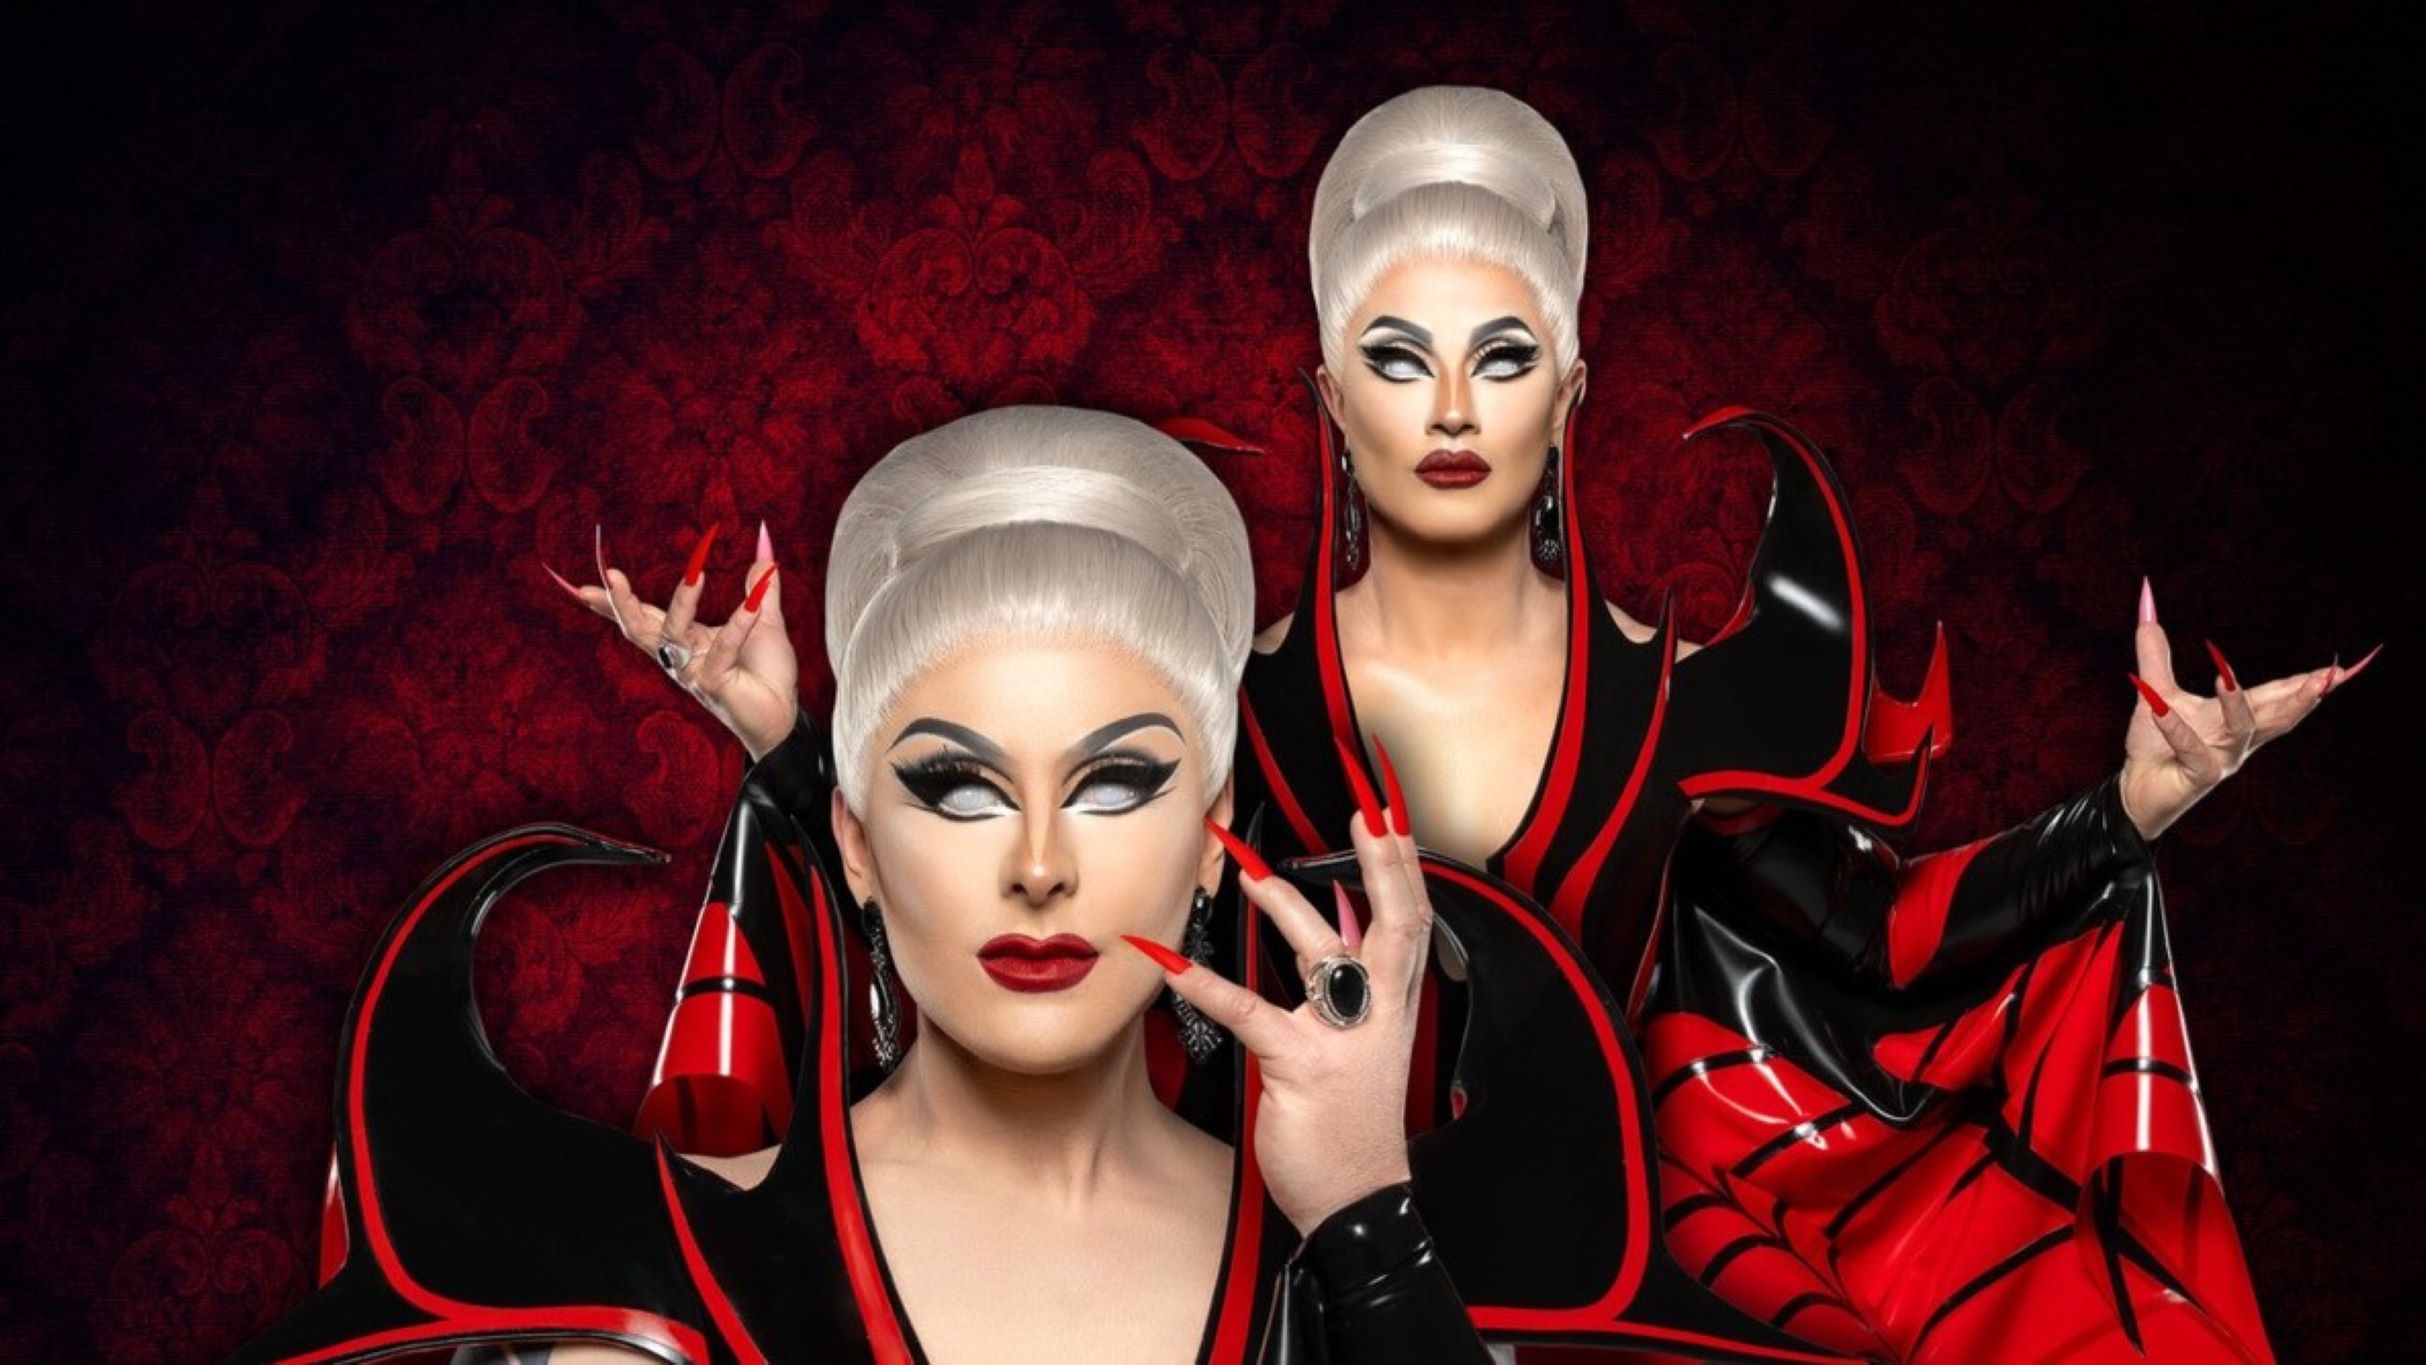 presale code for Boulet Brothers' Dragula: Season 5 Tour affordable tickets in Silver Spring